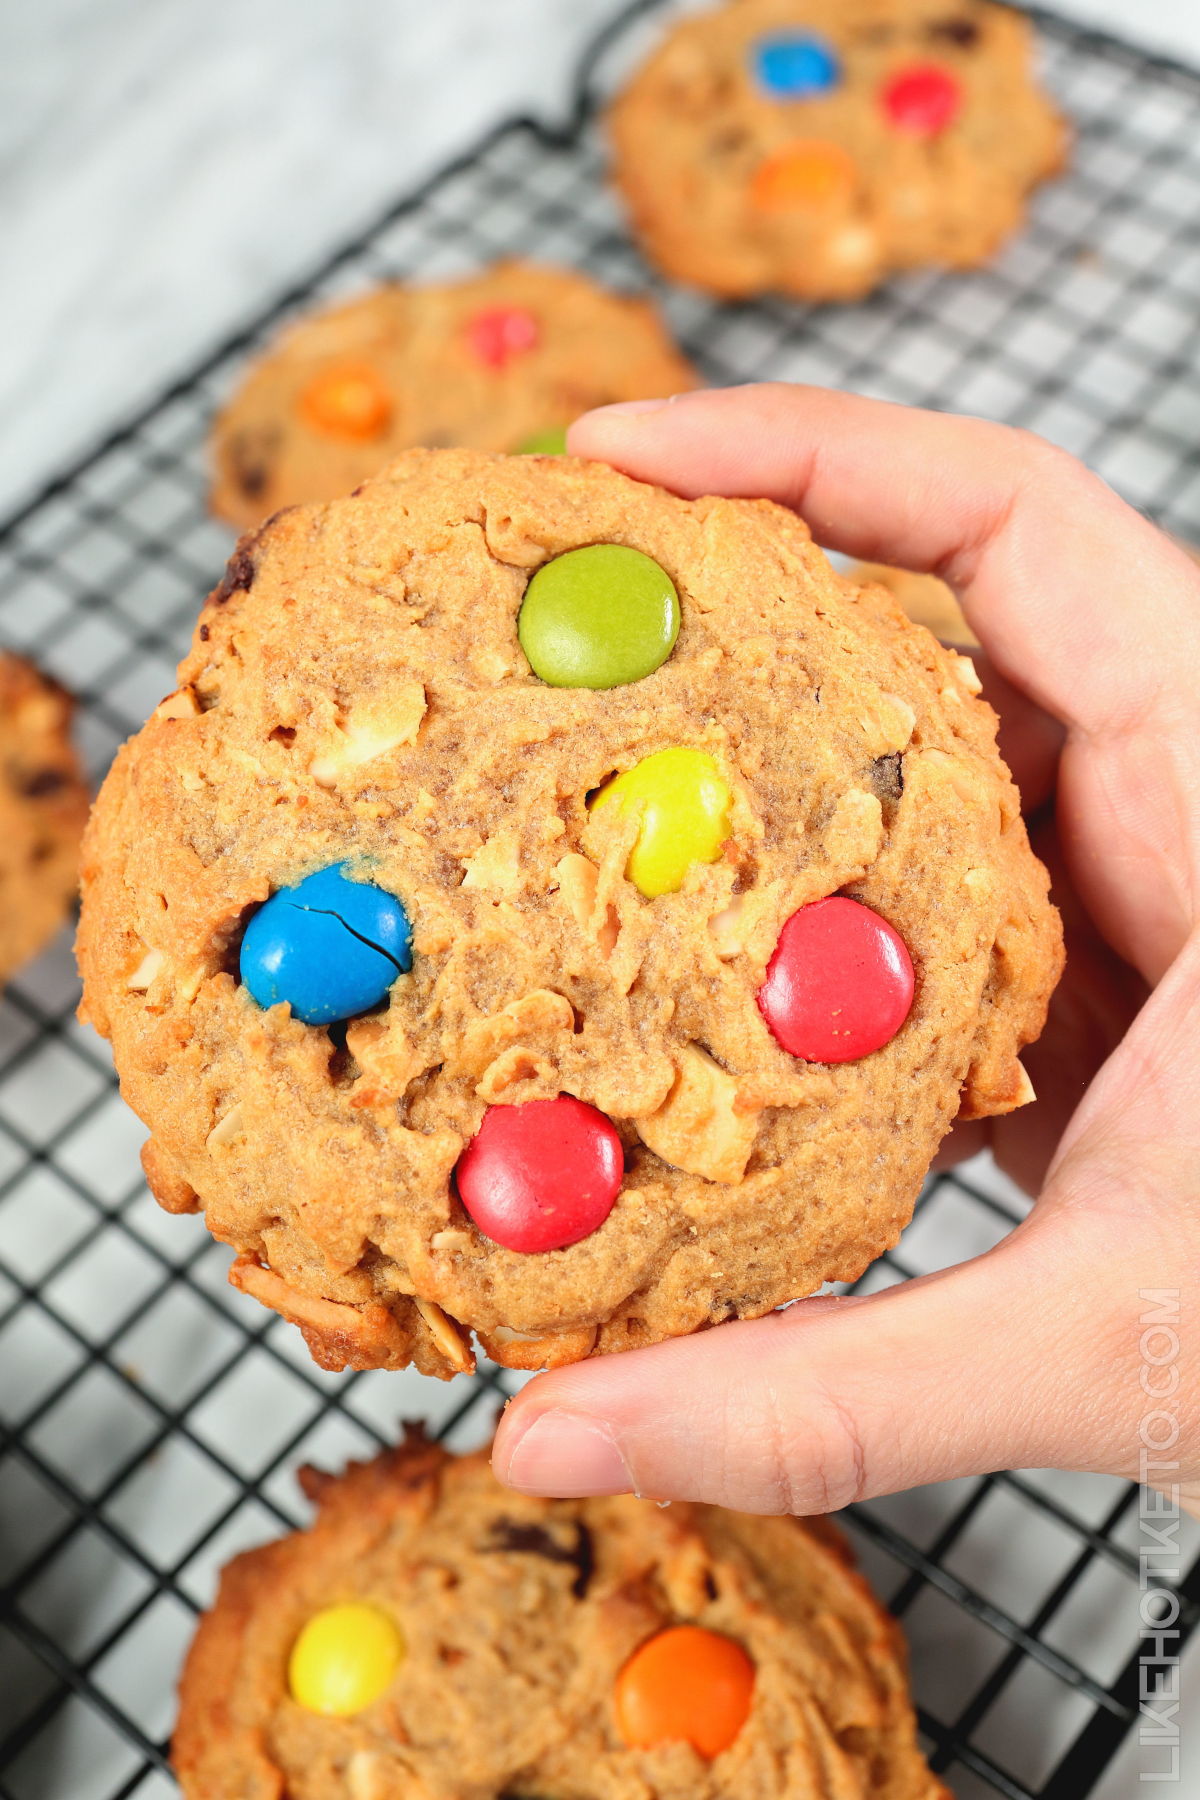 Keto monster cookie with M&Ms.